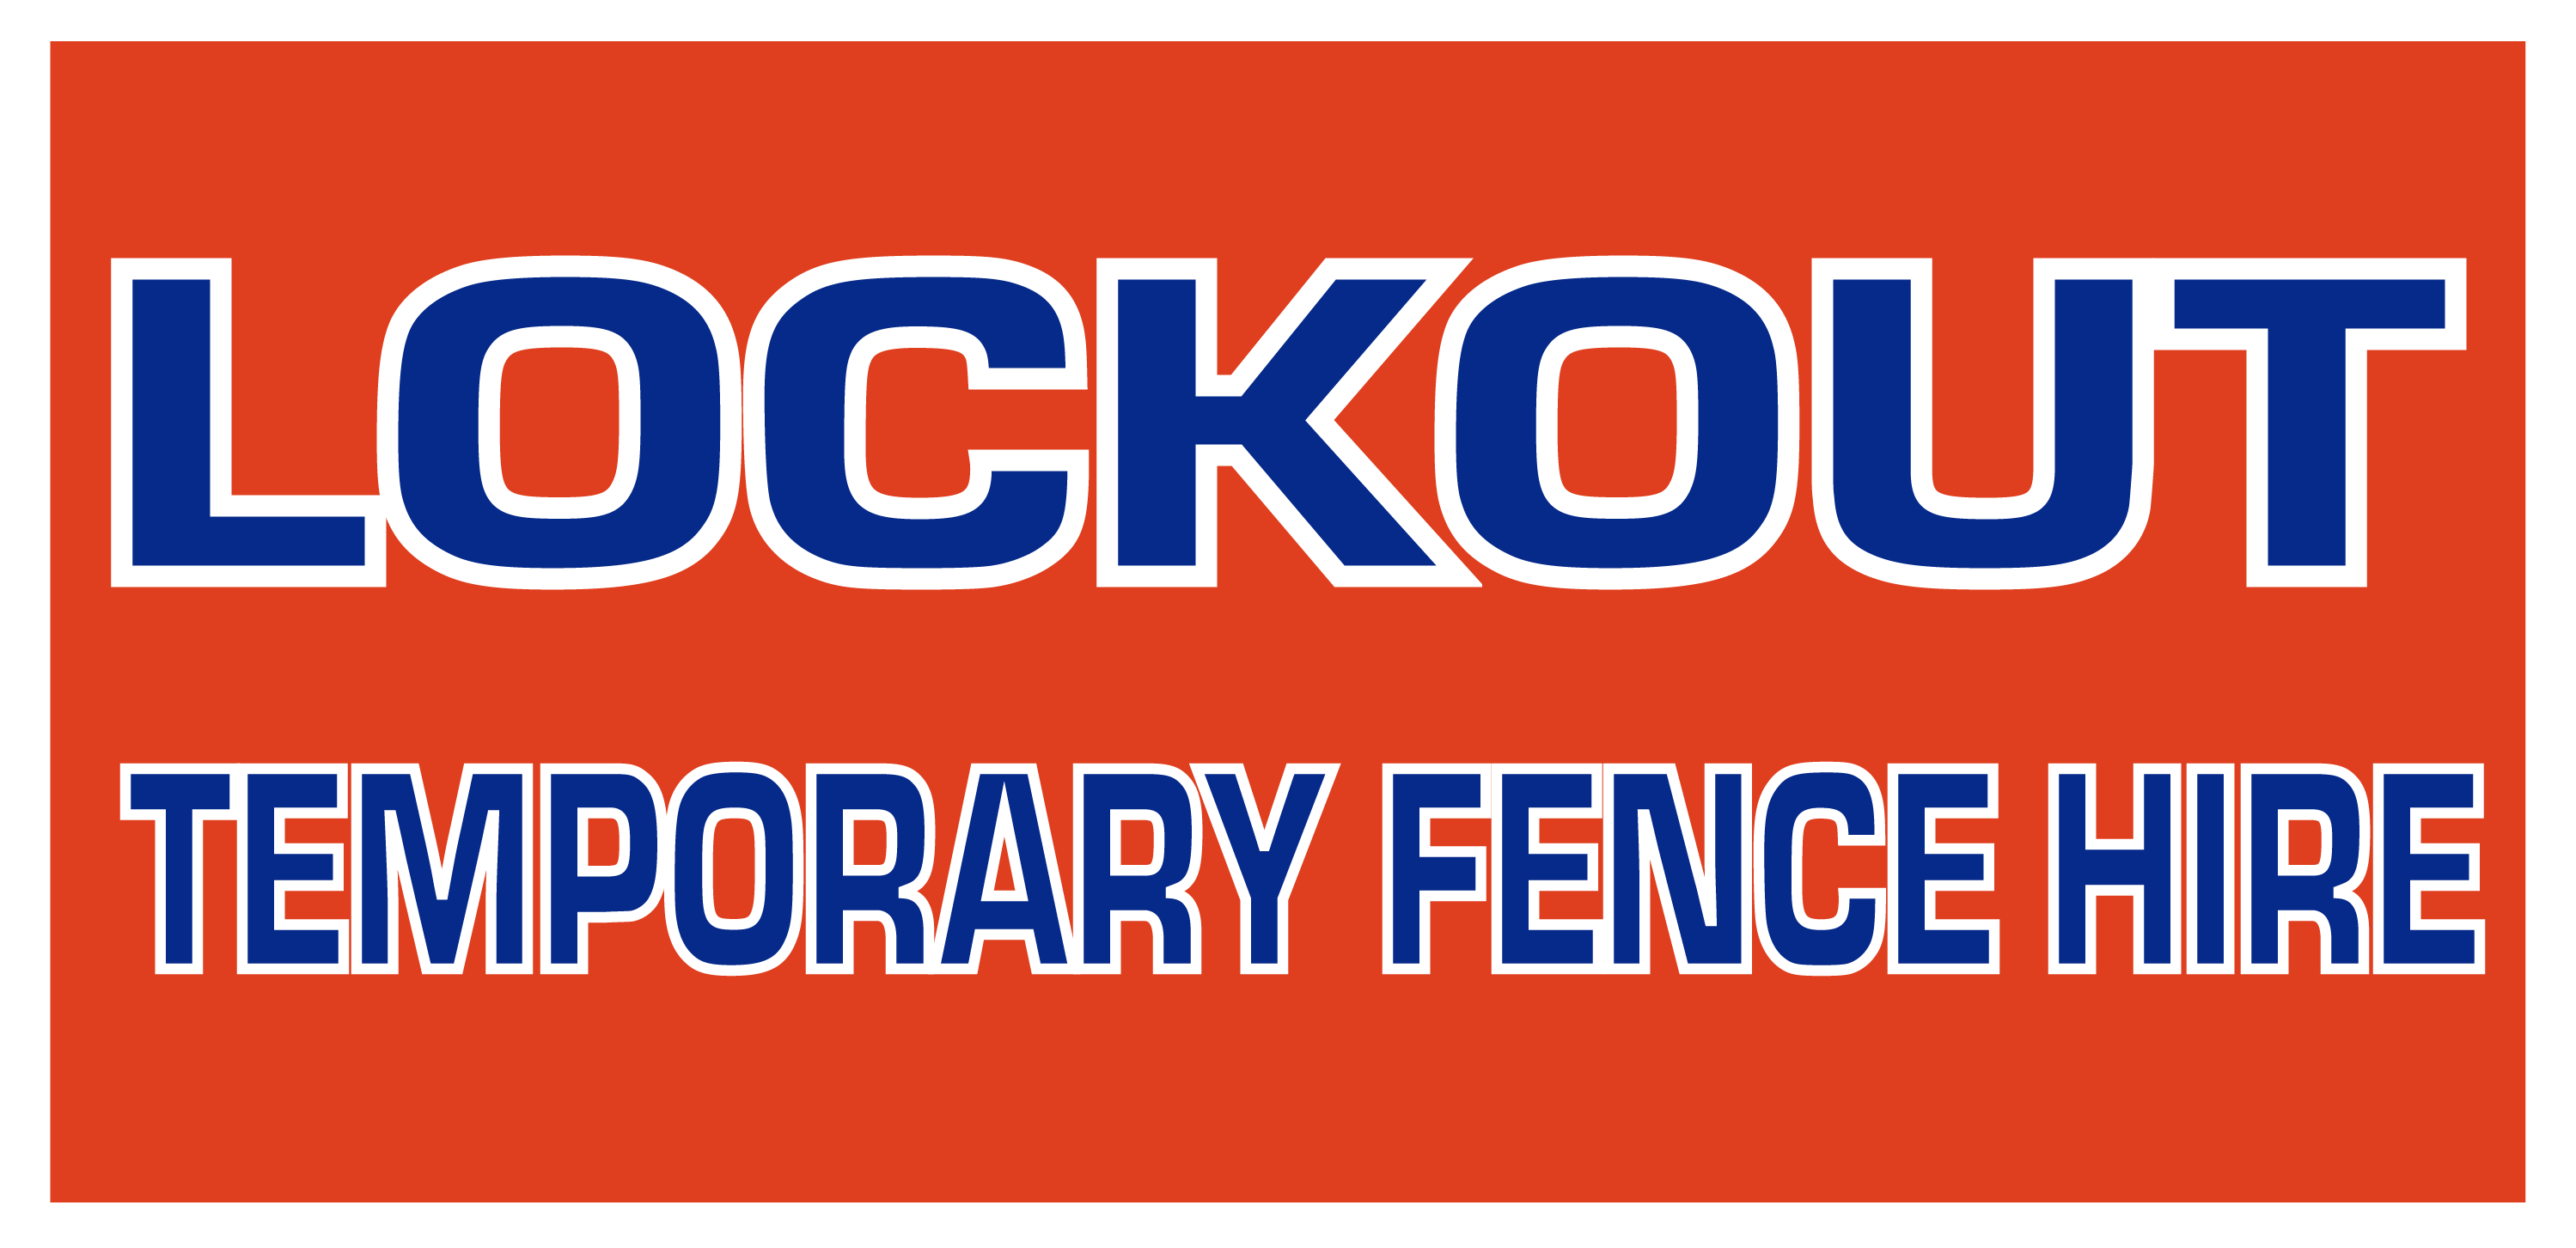 Lockout Temporary Fence Hire